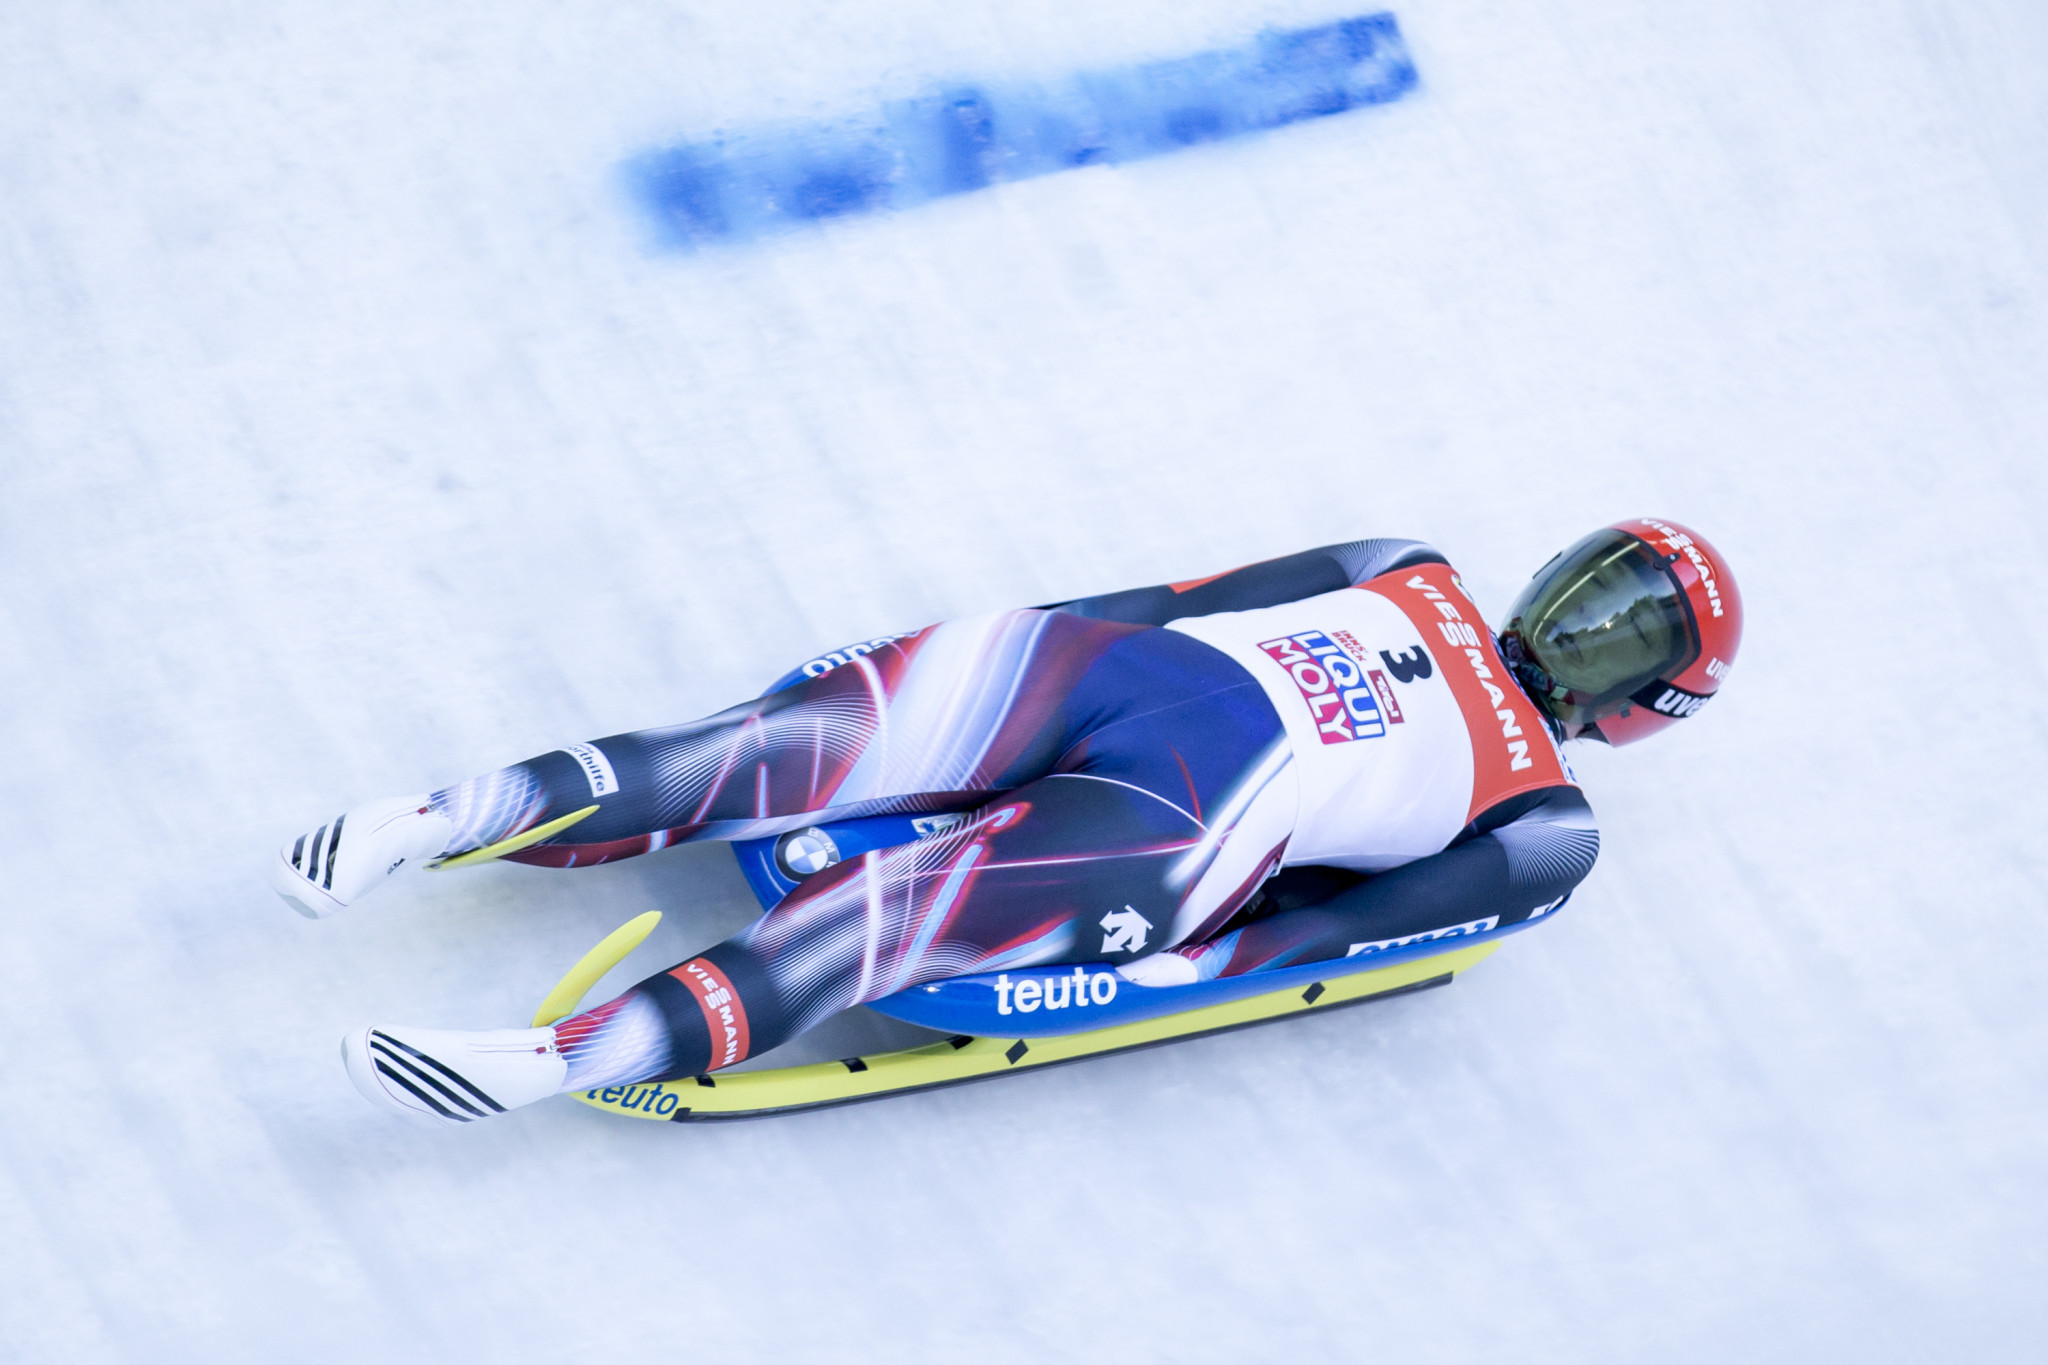 Tatjana Hüfner now holds the outright lead for women's Luge World Cup victories ©Getty Images